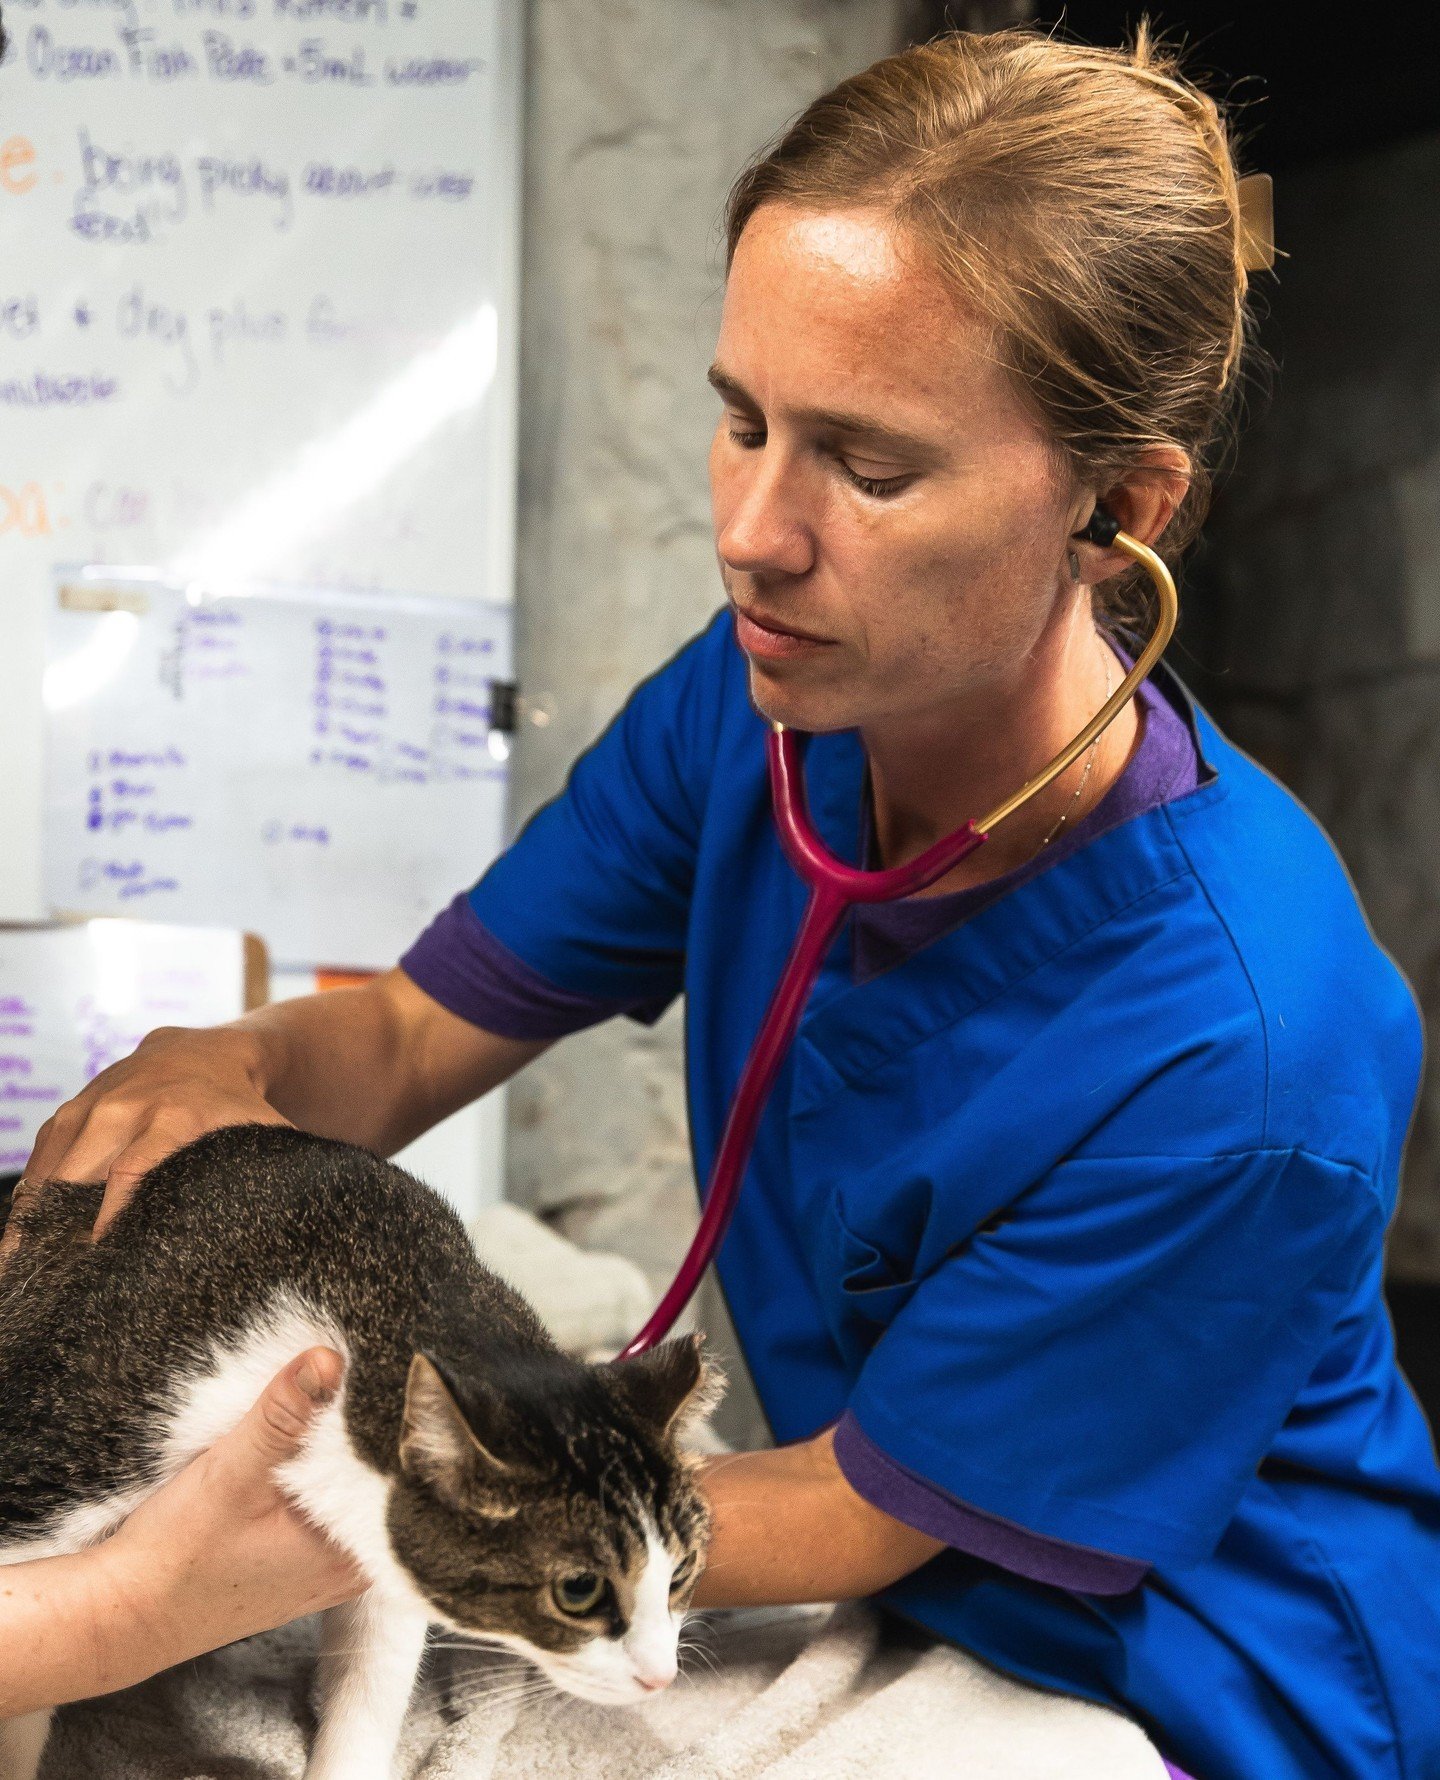 Happy World Veterinarian Day! 🐾 ⁠
⁠
THANK YOU to the veterinarians of the world who work so hard to keep our pets safe and healthy. 💕  And a very special heartfelt thank you to our very own Dr. Roth, Dr. Vansandt, and Dr. Chapman, who work with our